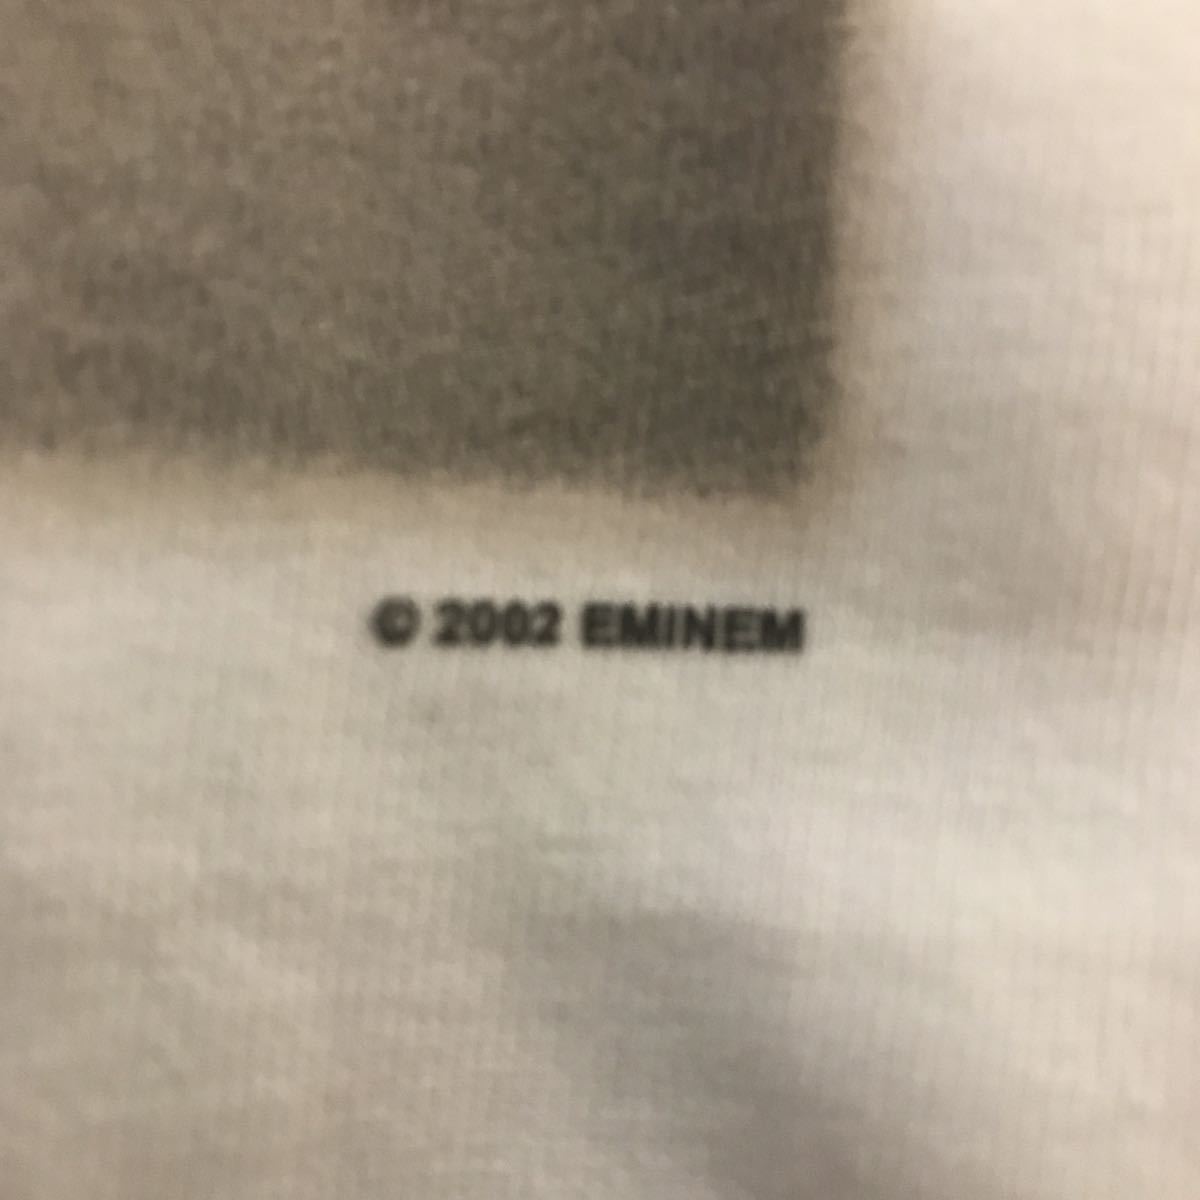  copy light equipped tag equipped eminem T-shirt the eminem show 00s man M size white 2002 year that time thing 2000 period 